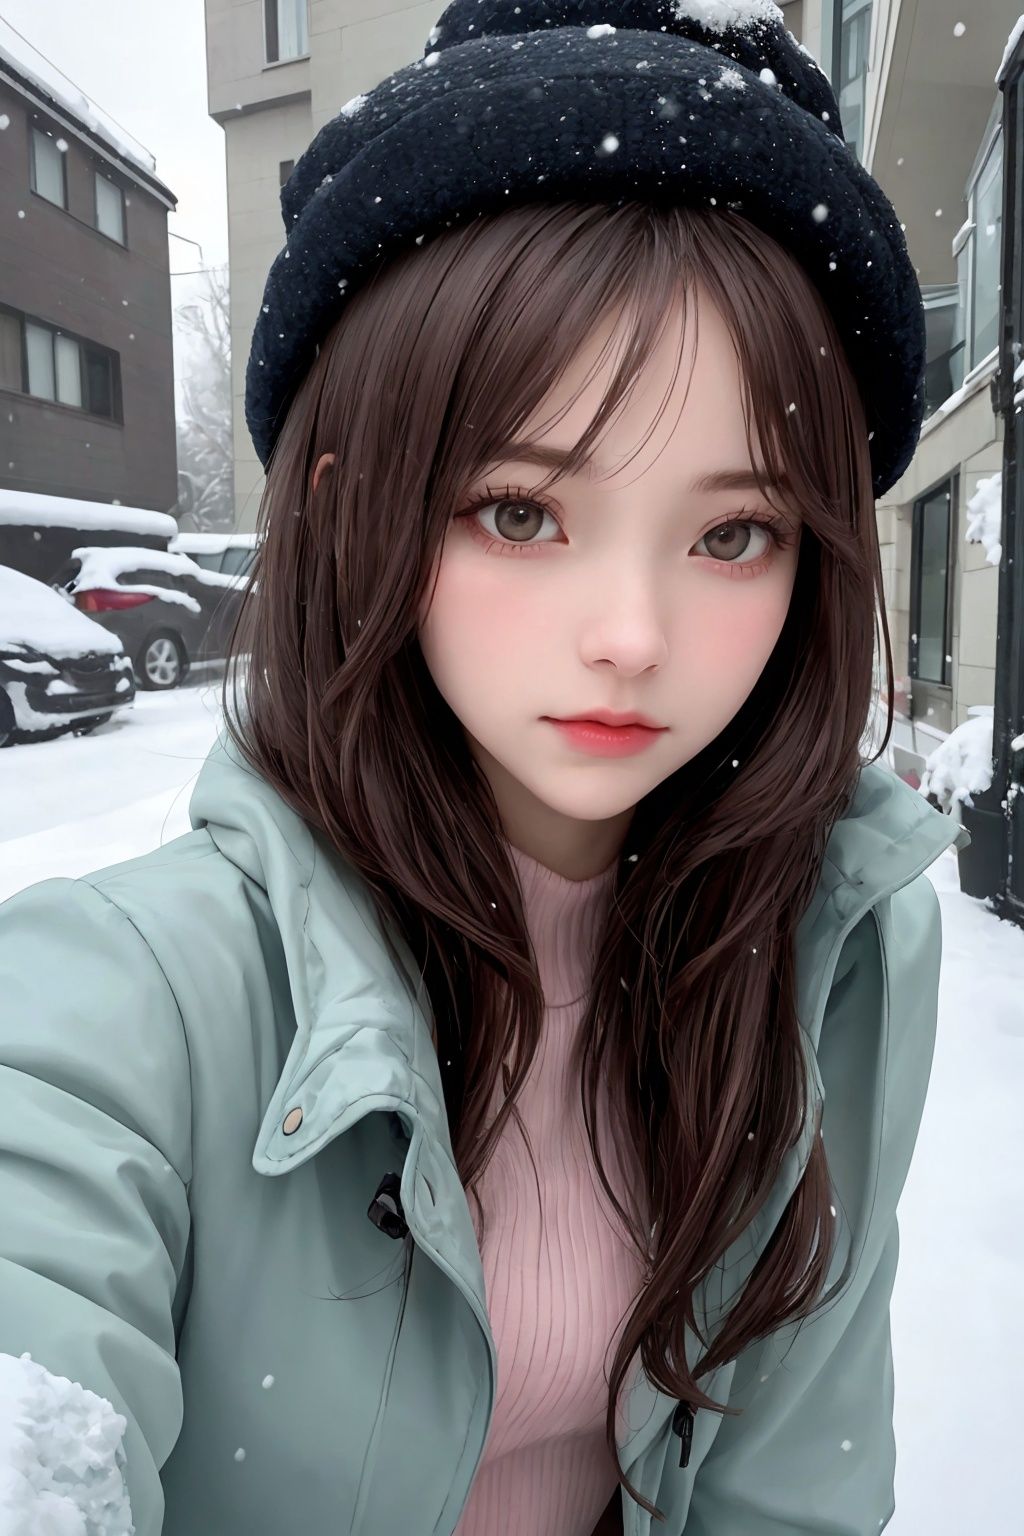 The girl in the plush hat,like a masterpiece of realism,is superior in quality,and the picture quality reaches the ultra-high resolution 16K realm. Imagine,it's snowing outside,she's dressed in pink,her long legs are bare,a apple green coat is draped around her body,and then a coat is covered,the smell of winter is blowing in her face. The picture is high-definition,the contrast between light and dark is prominent,the side light and diffuse reflection are interwoven,the collision light,the close-up moment is frozen,and the strong emotion is coming out. This is the charm of modernism,a picture,a thousand words,gripping.,